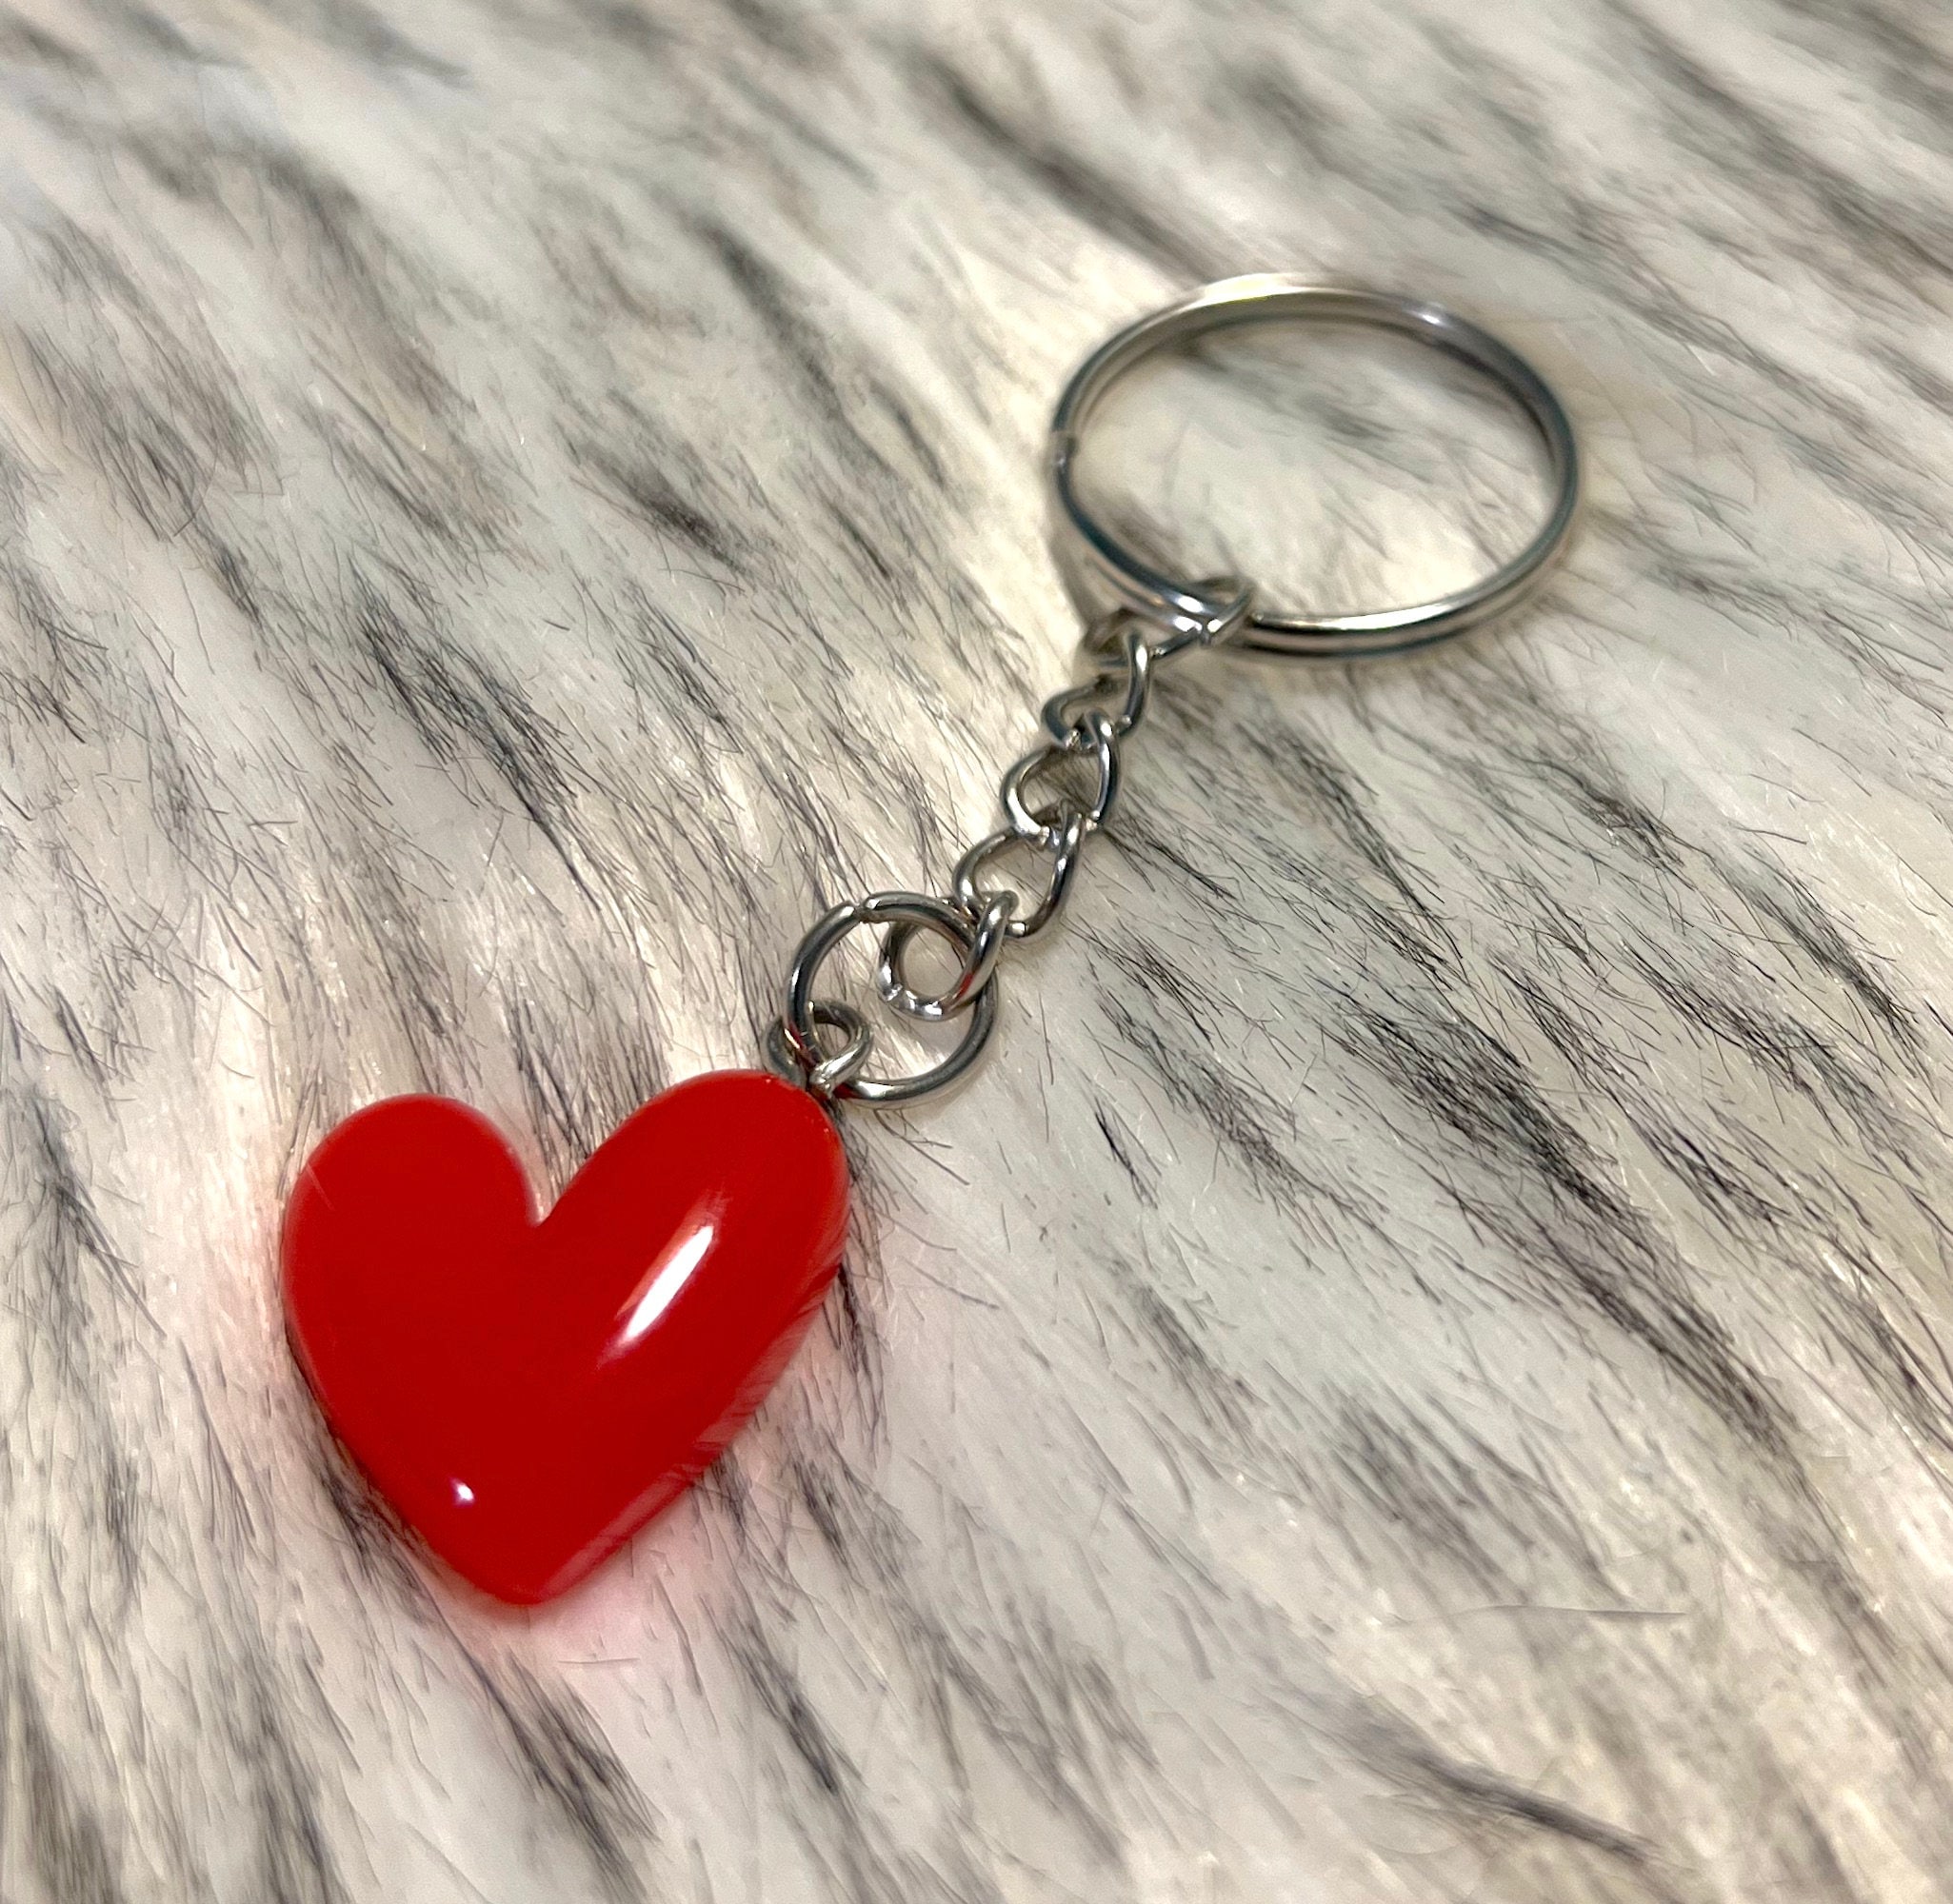 Love Red Heart with Teddy Silver Keychain Best Gifts for Friends